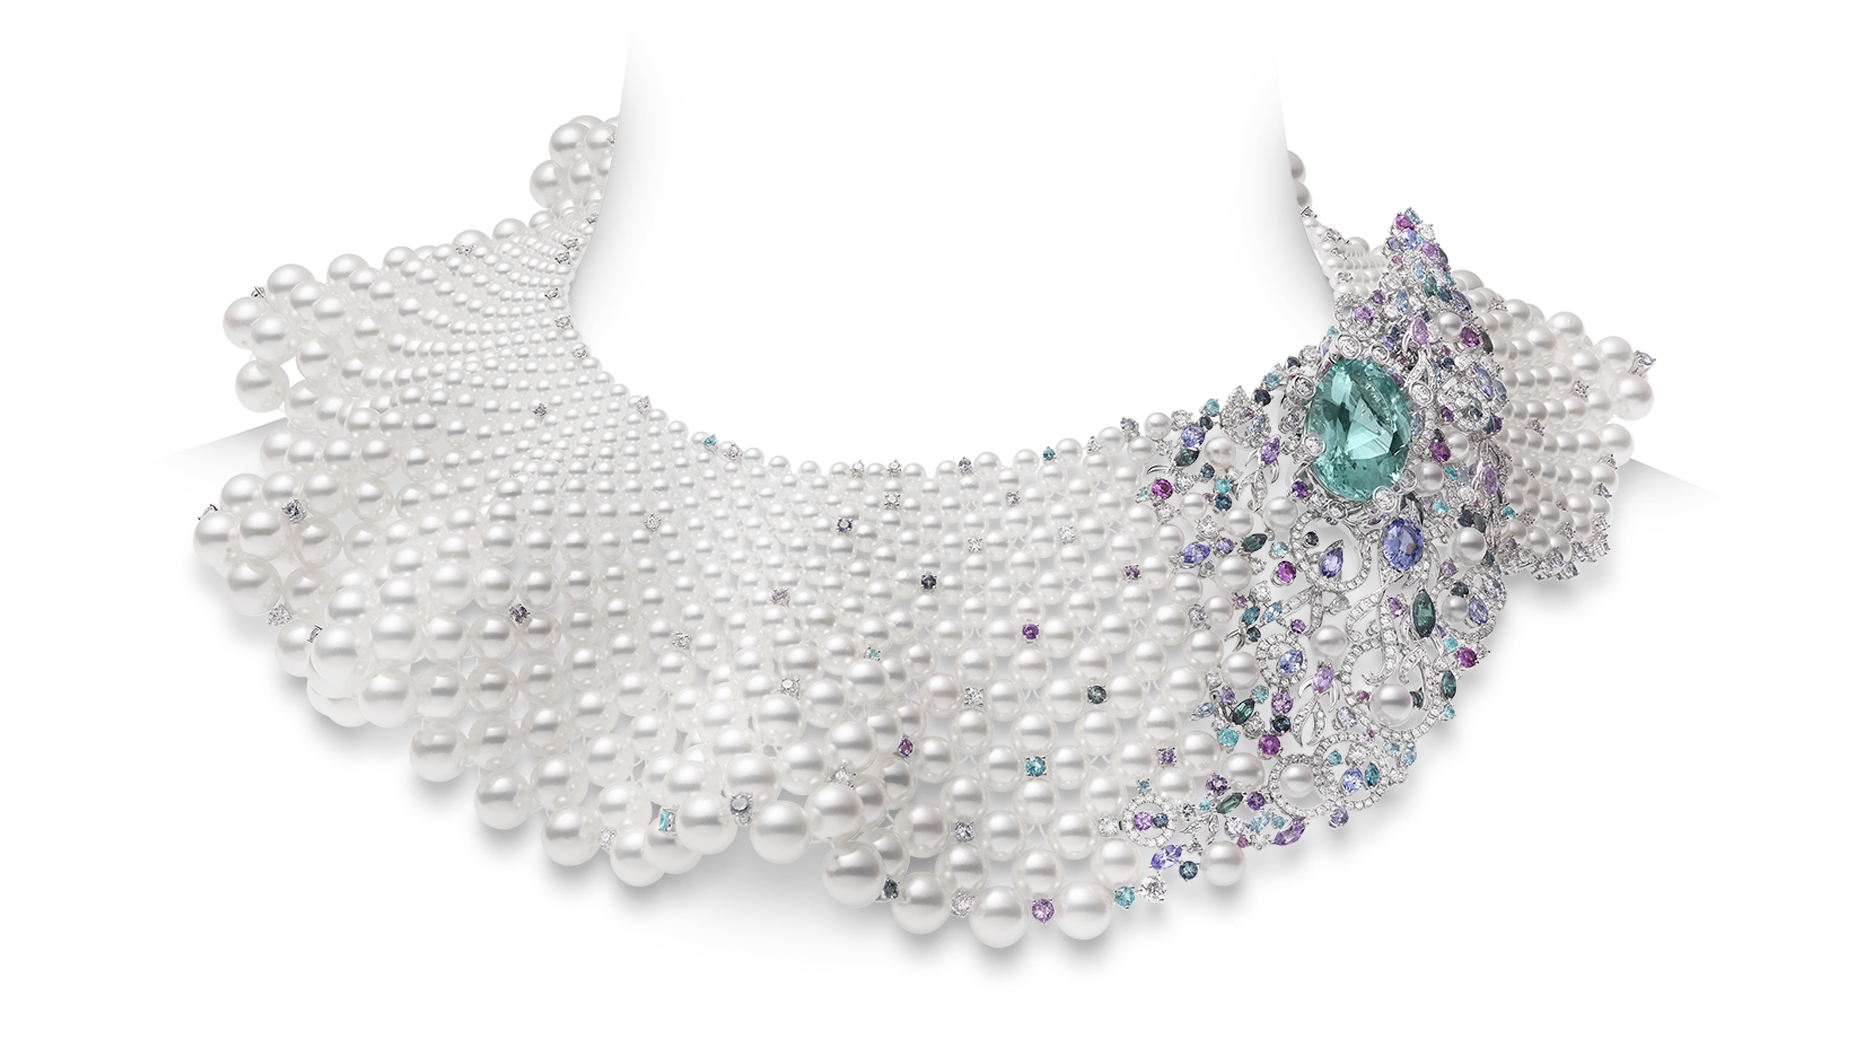 Mikimoto's High Jewelry Pays Homage to the Sea